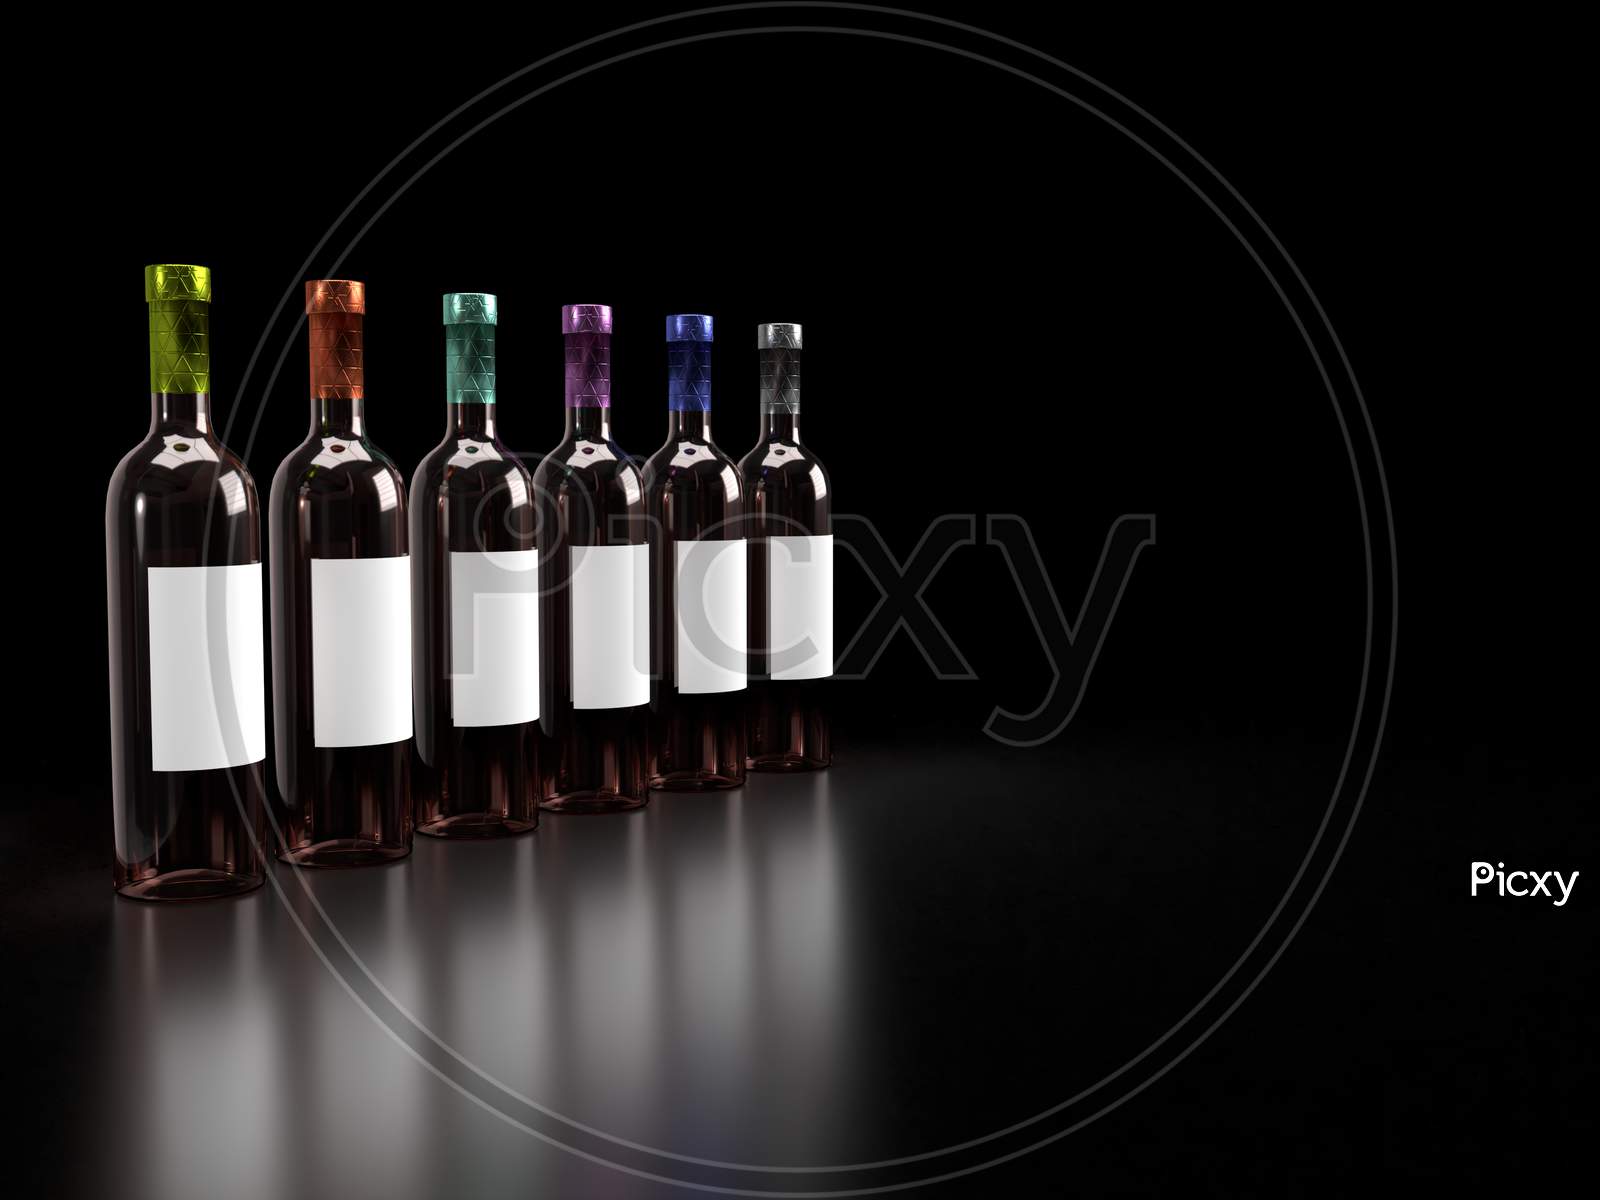 3D Render Of Different Colored Foil Sealed Amber Glass Wine Bottle In Solid Black Background On Reflective Surface With White Blank Label For Mockup.